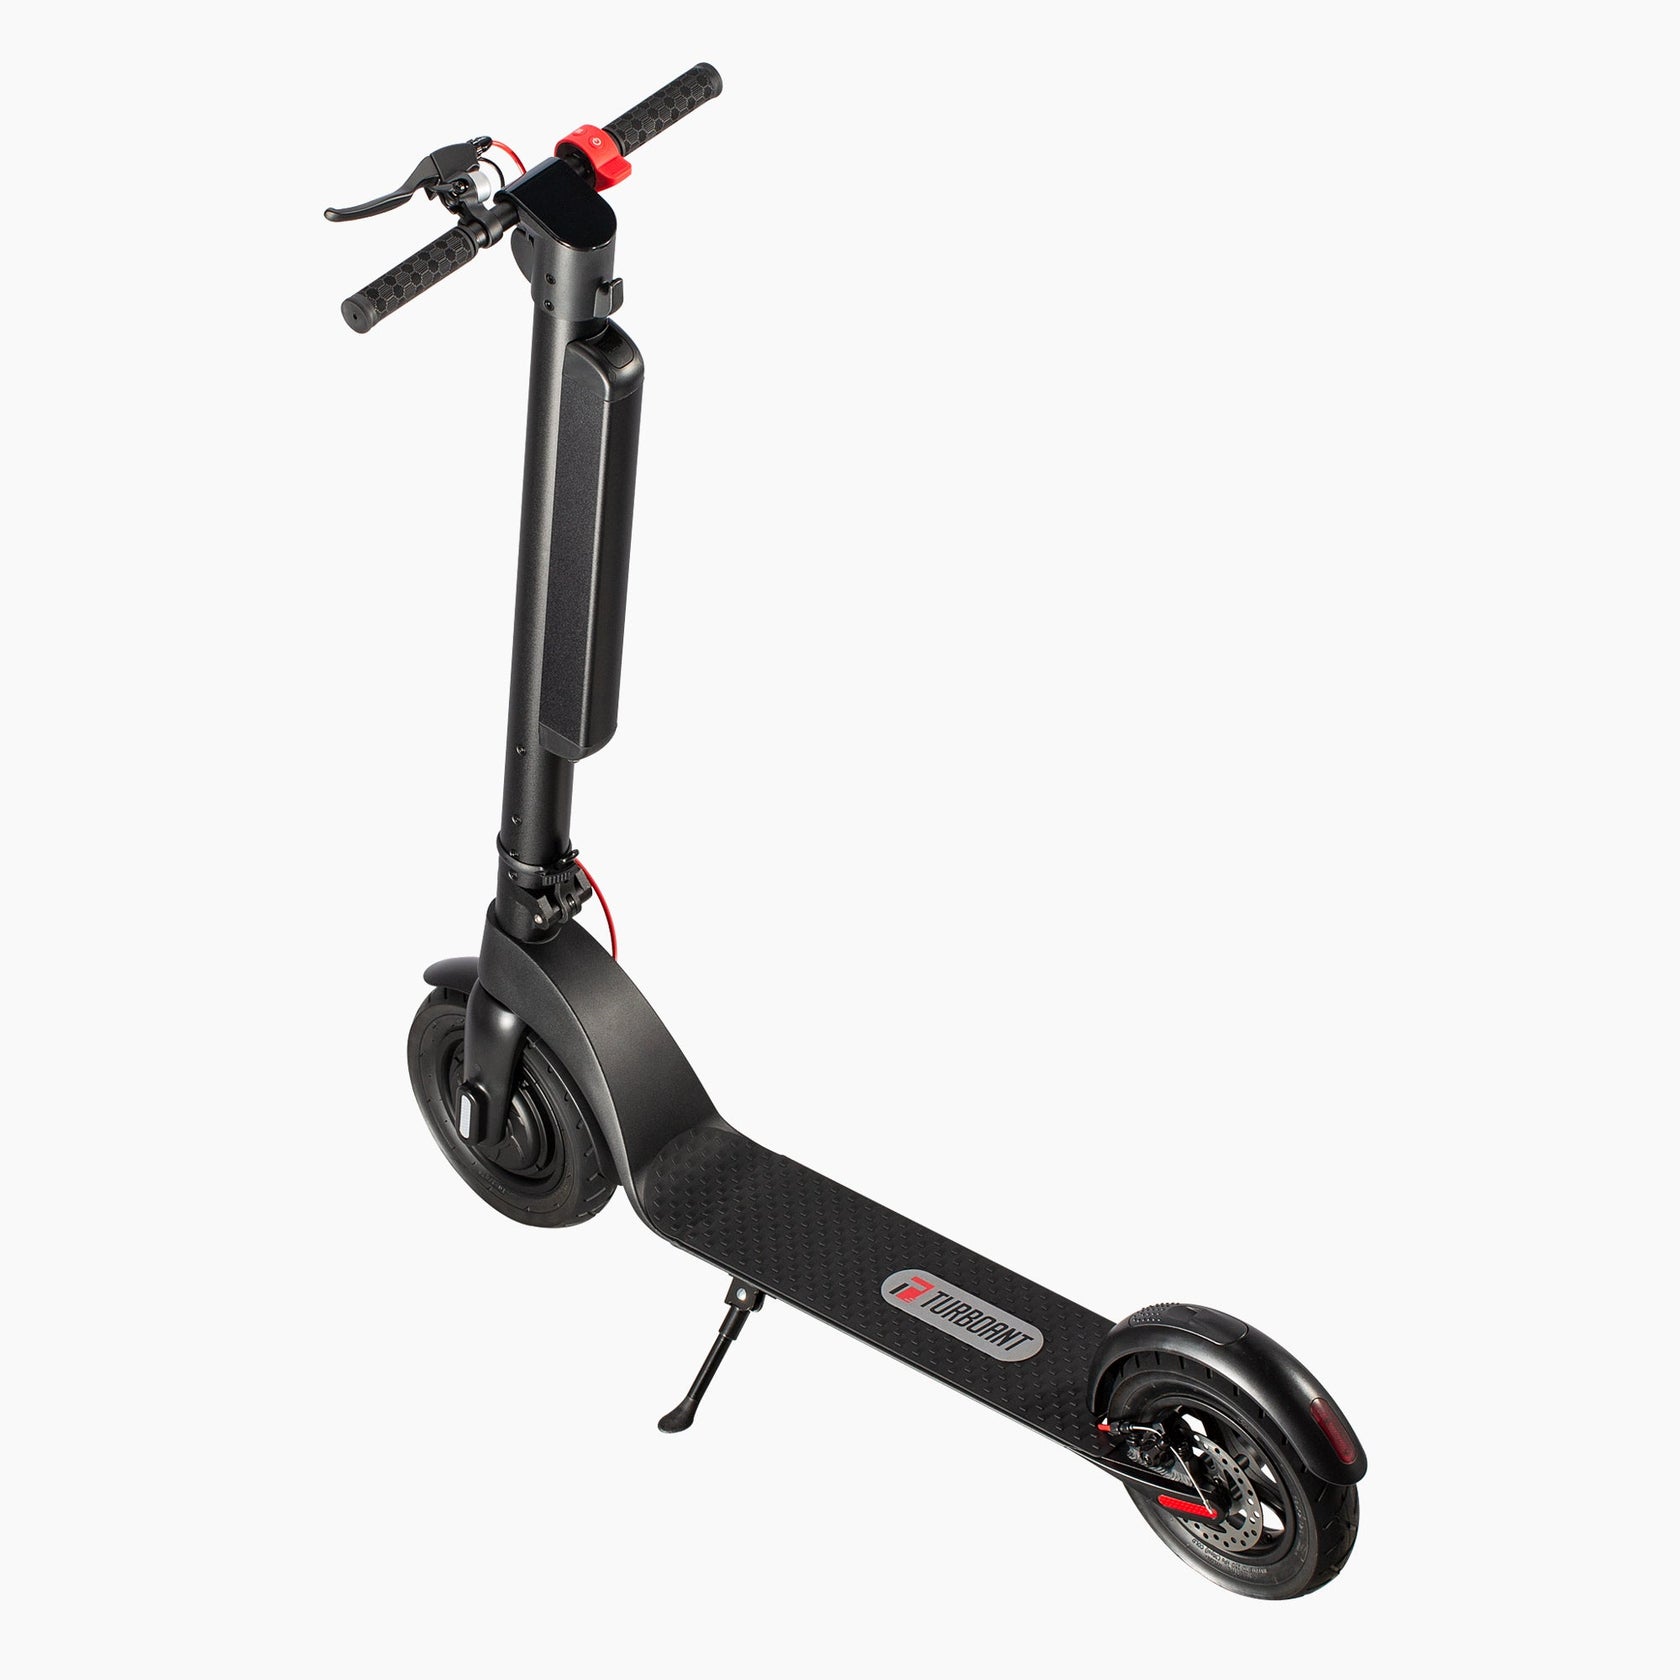 TurboAnt X7 Pro electric scooter for heavy adults